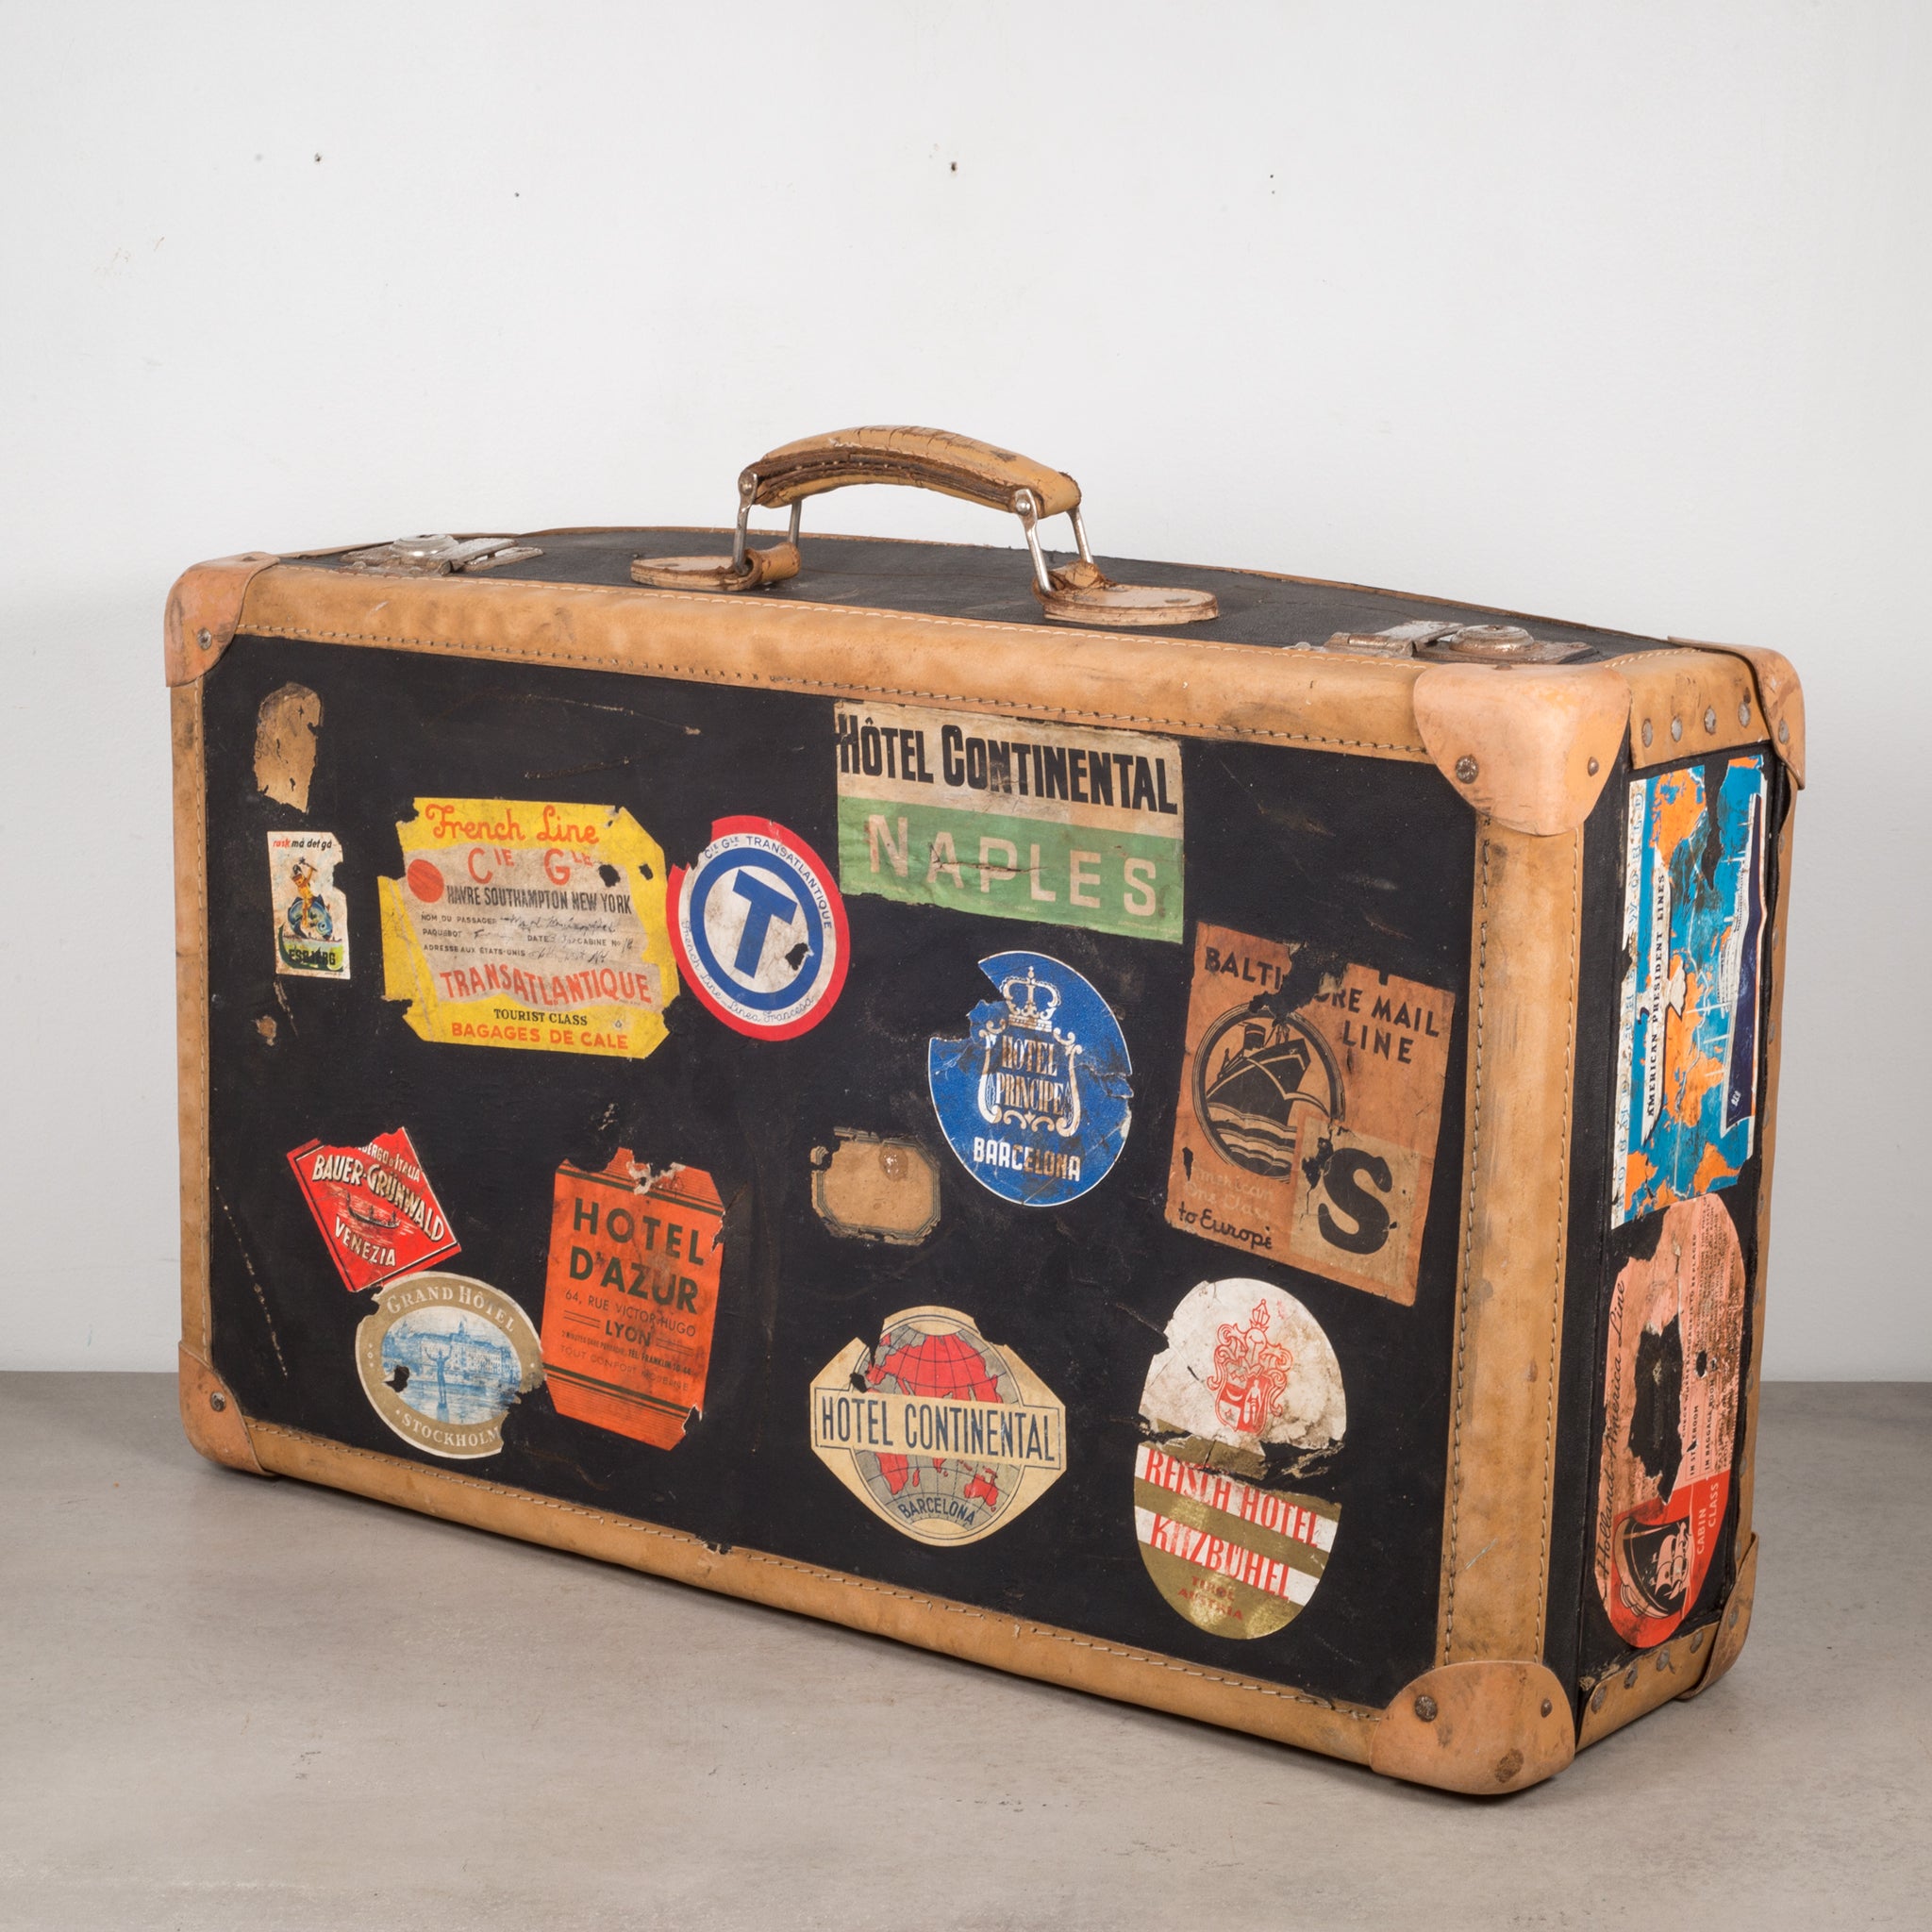 Vintage Suitcase. Leather suitcase with retro travel stickers